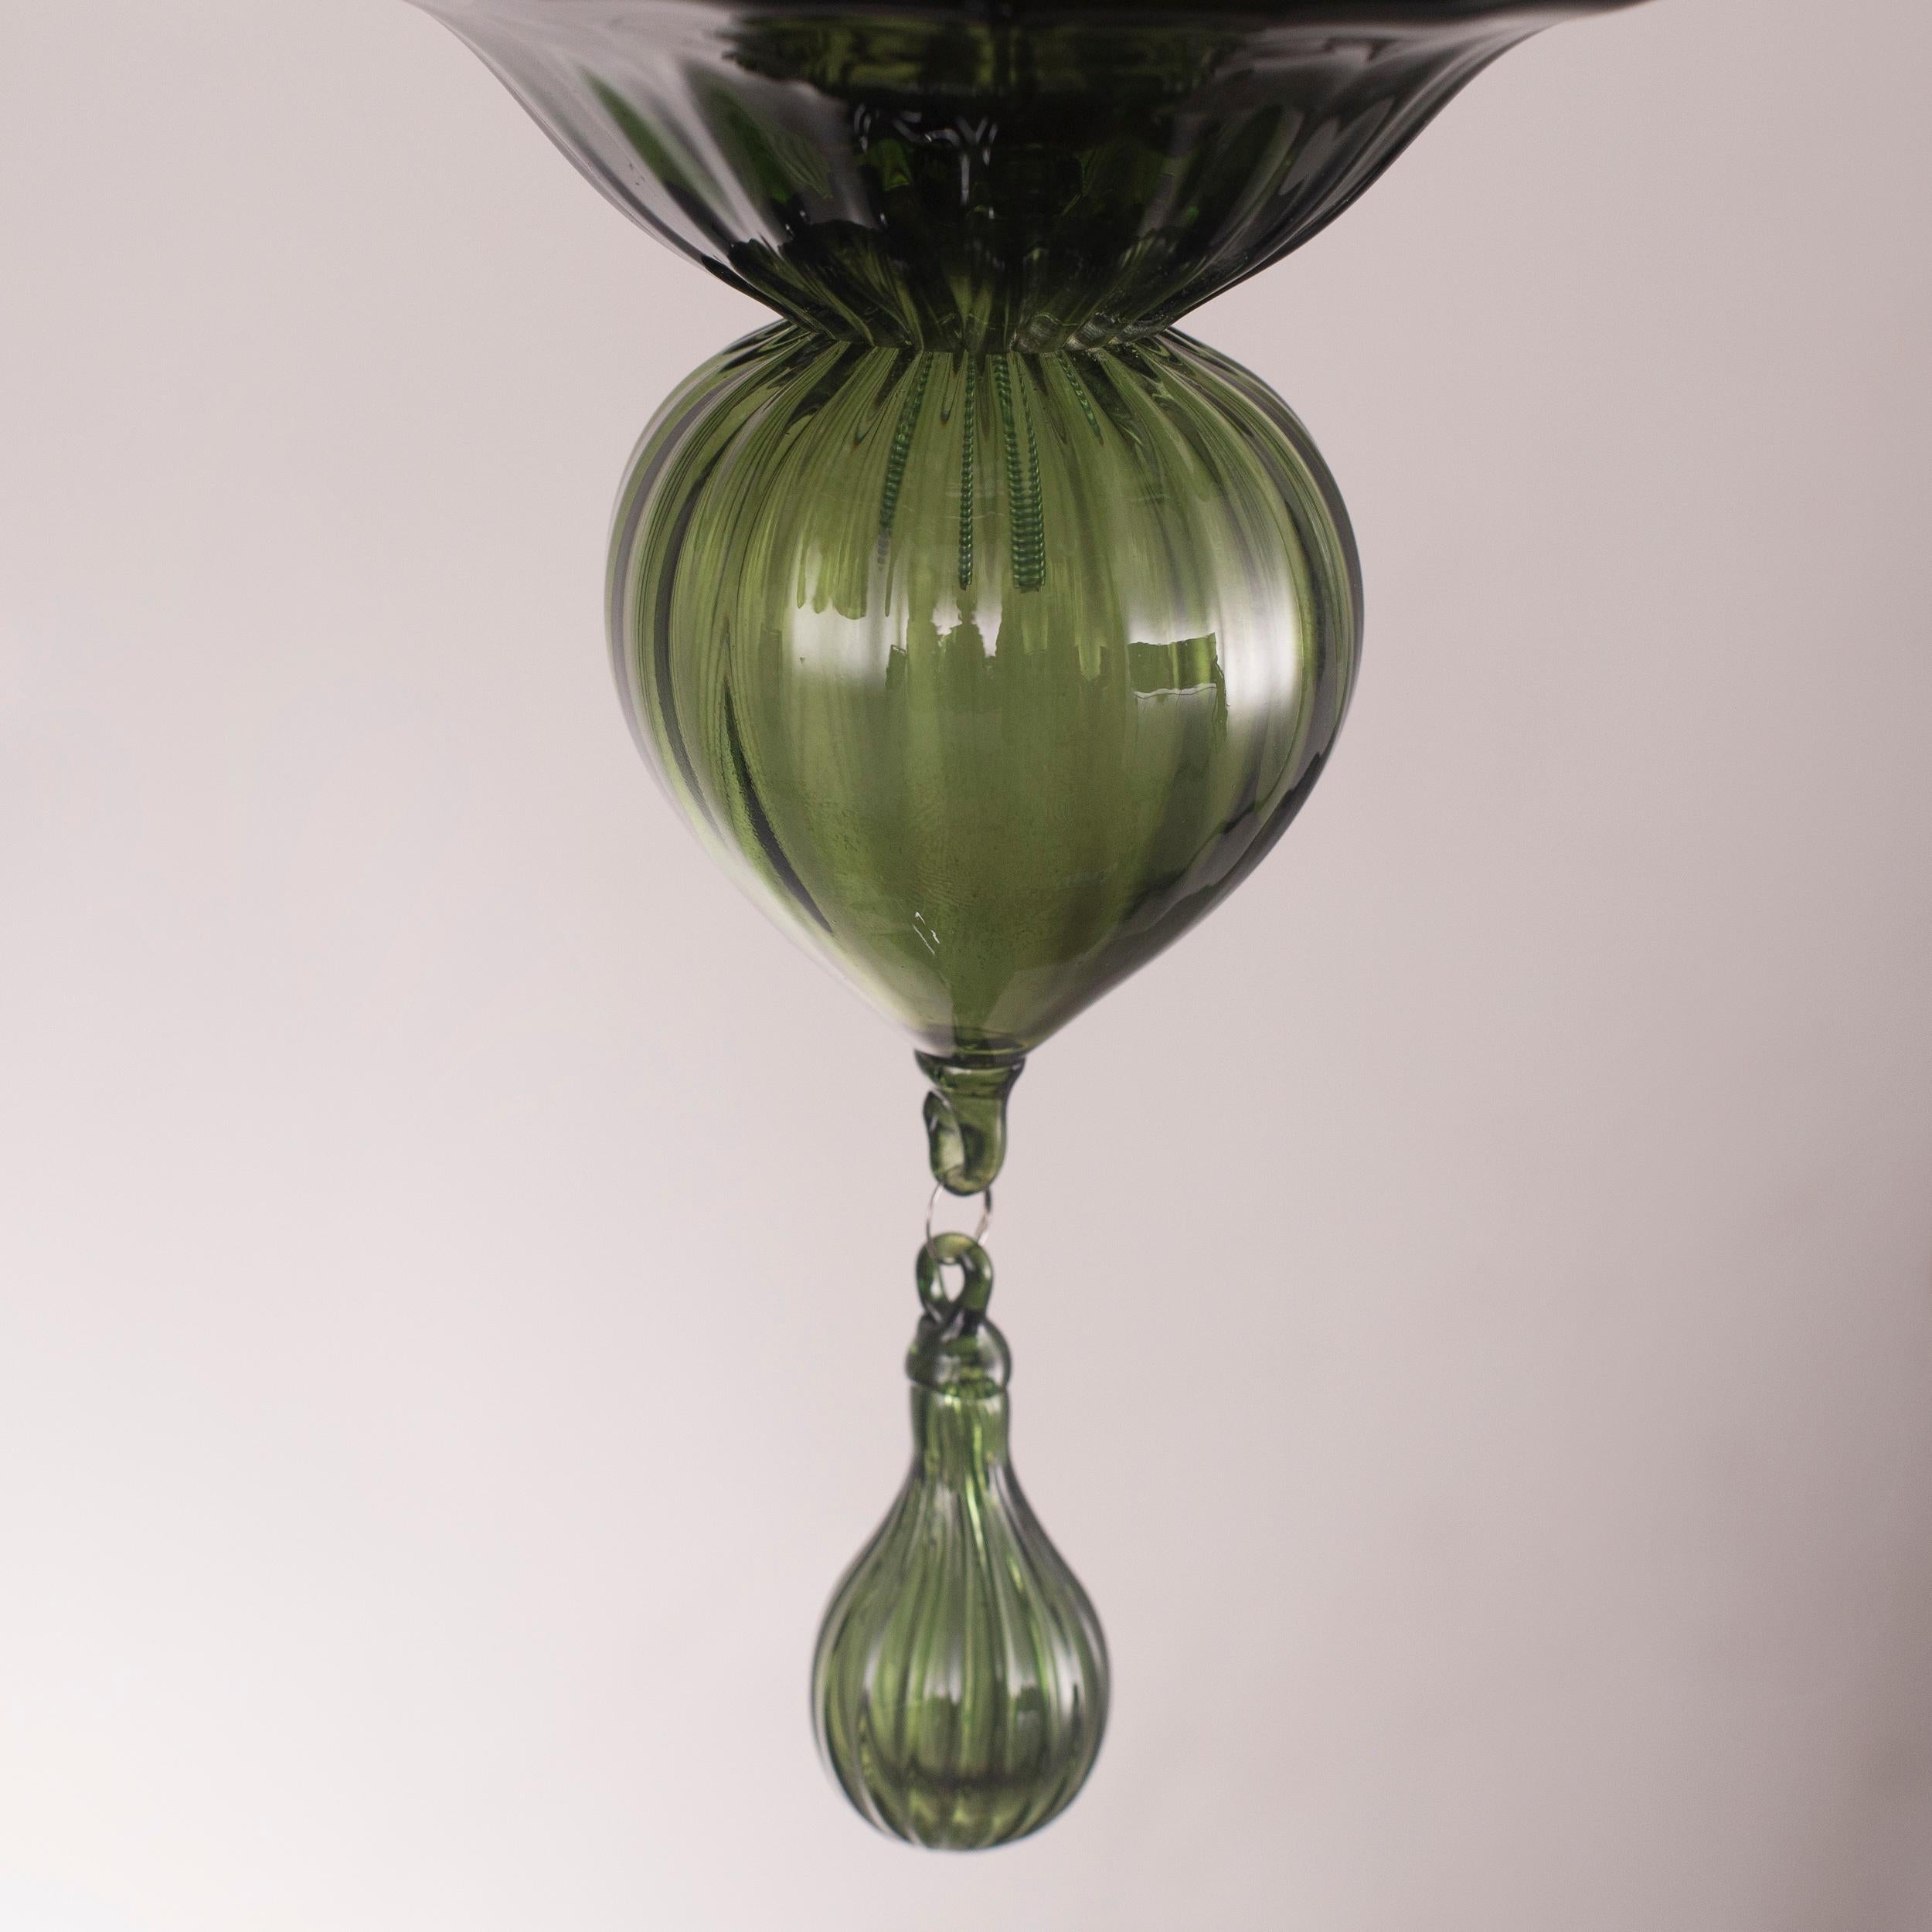 Contemporary Venetian Chandelier 5 Arms Olive Green Murano Glass Simplicissimus by Multiforme For Sale